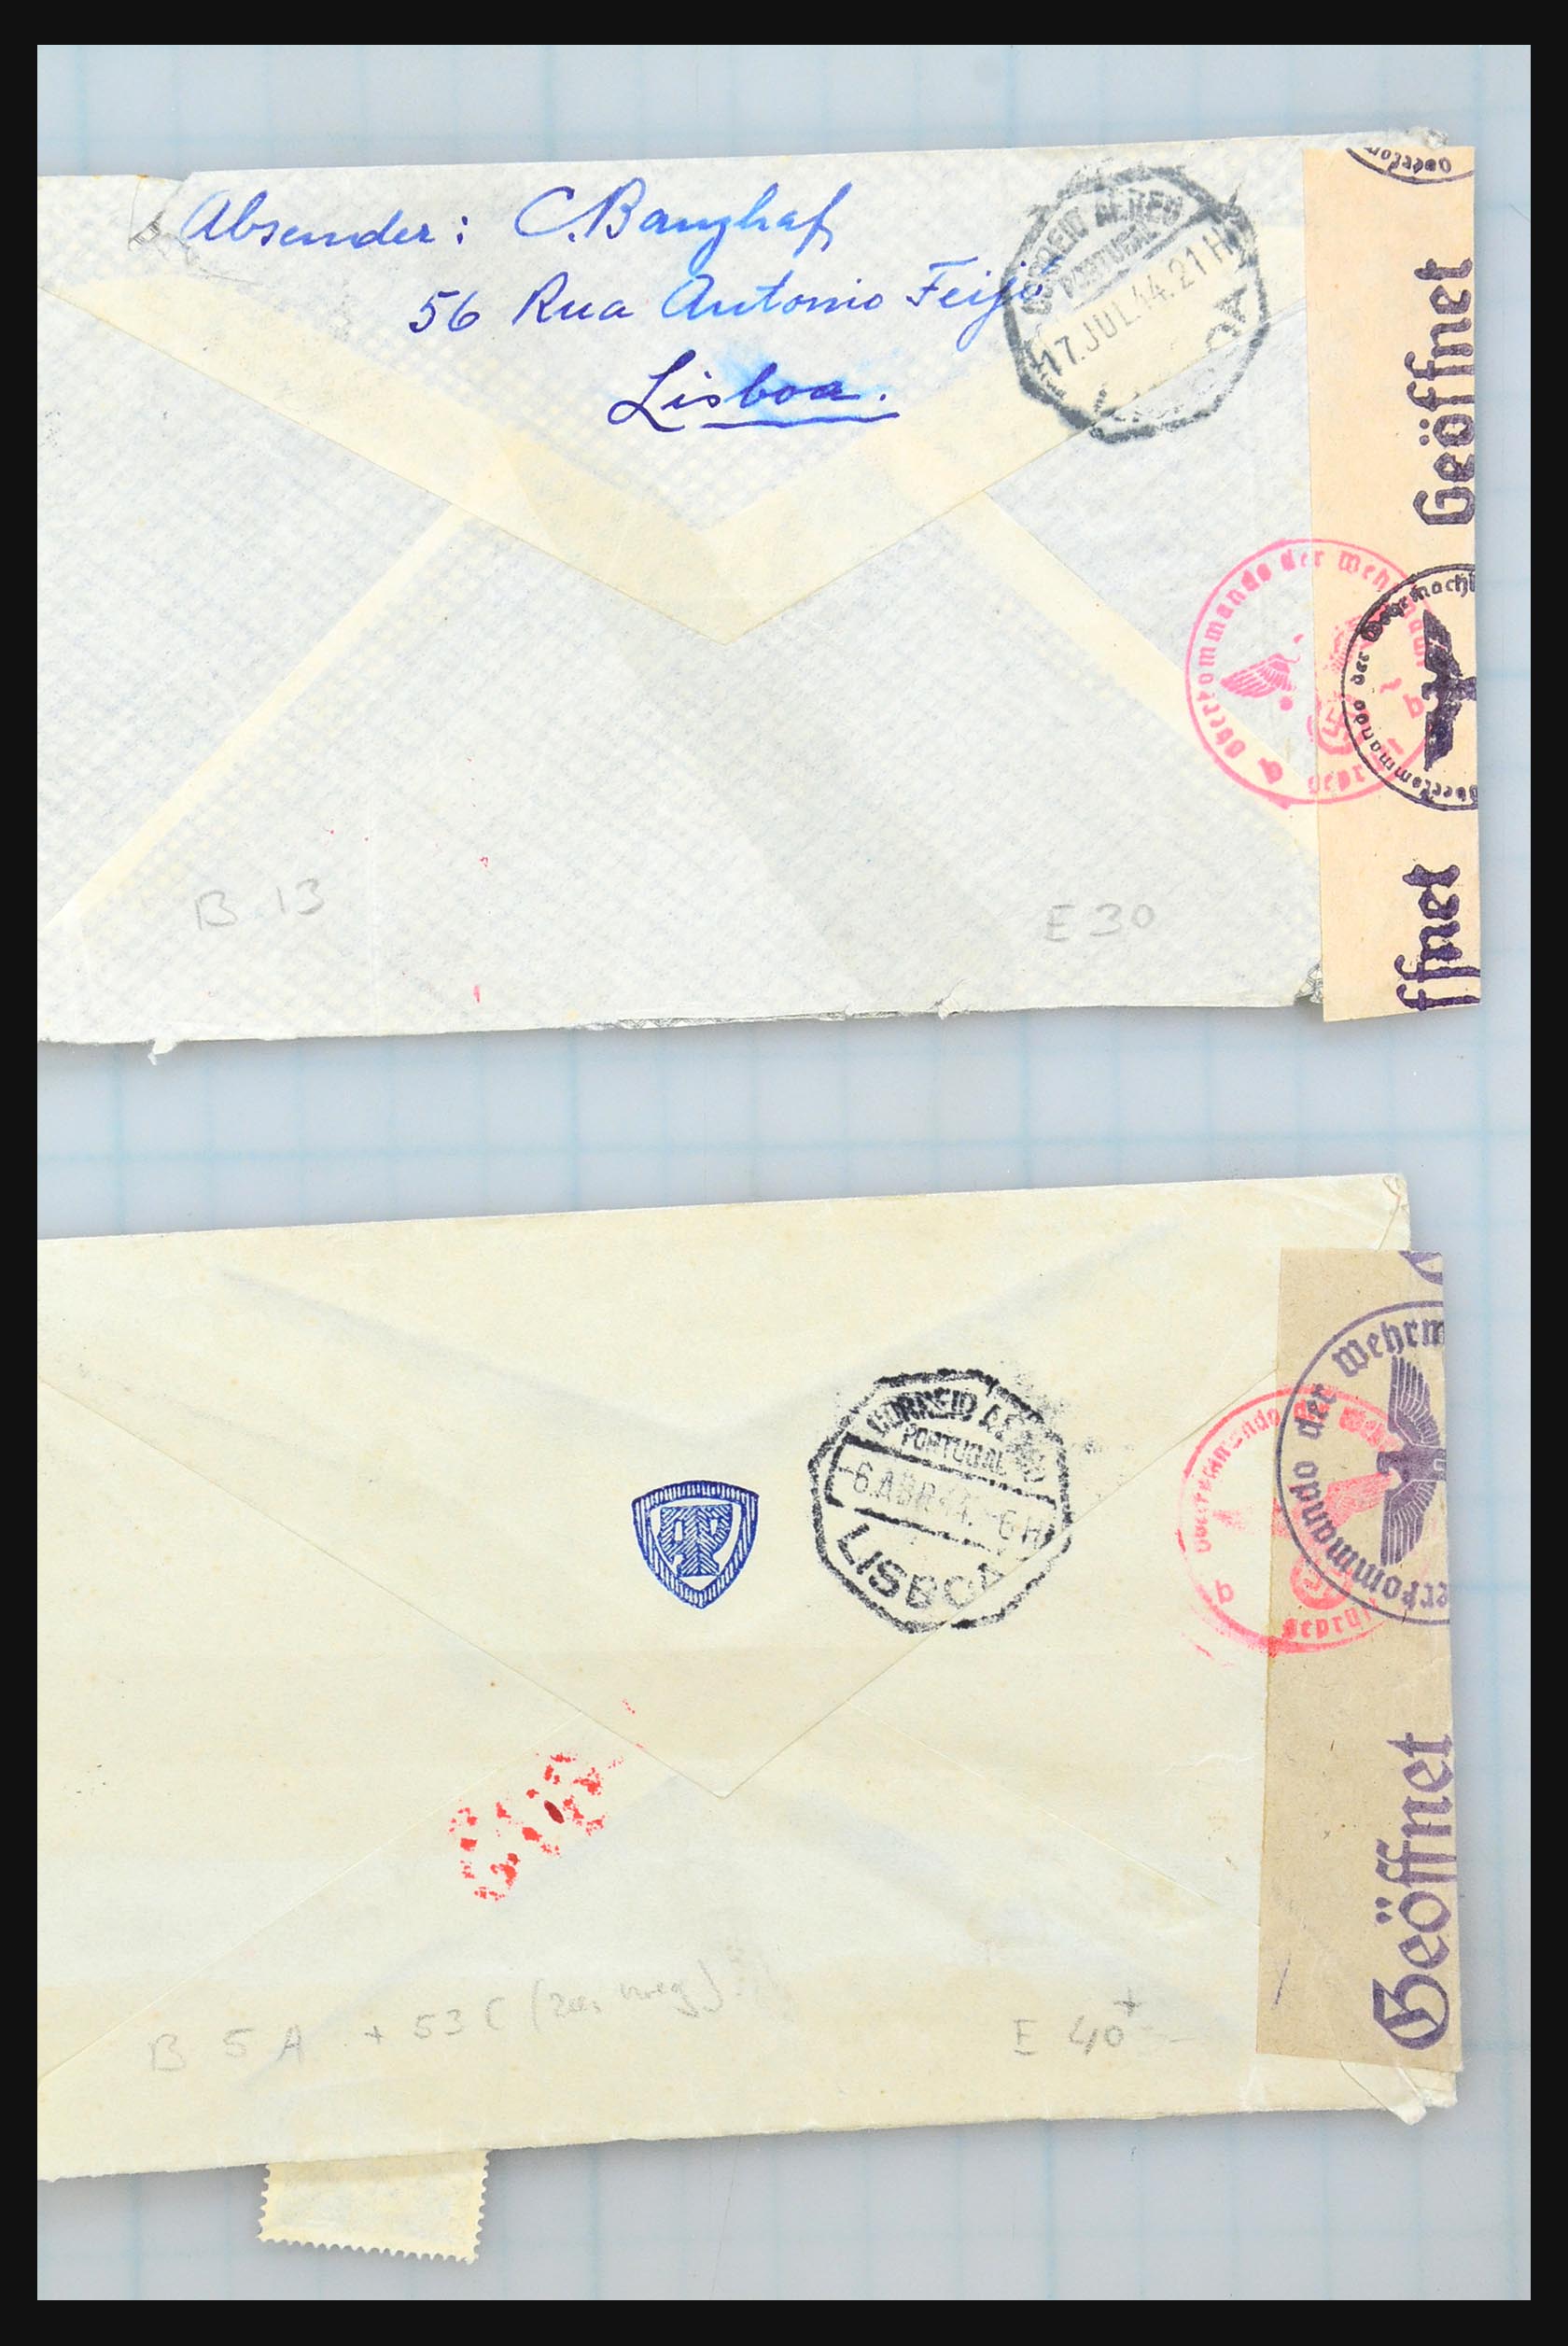 31358 251 - 31358 Portugal/Luxemburg/Greece covers 1880-1960.